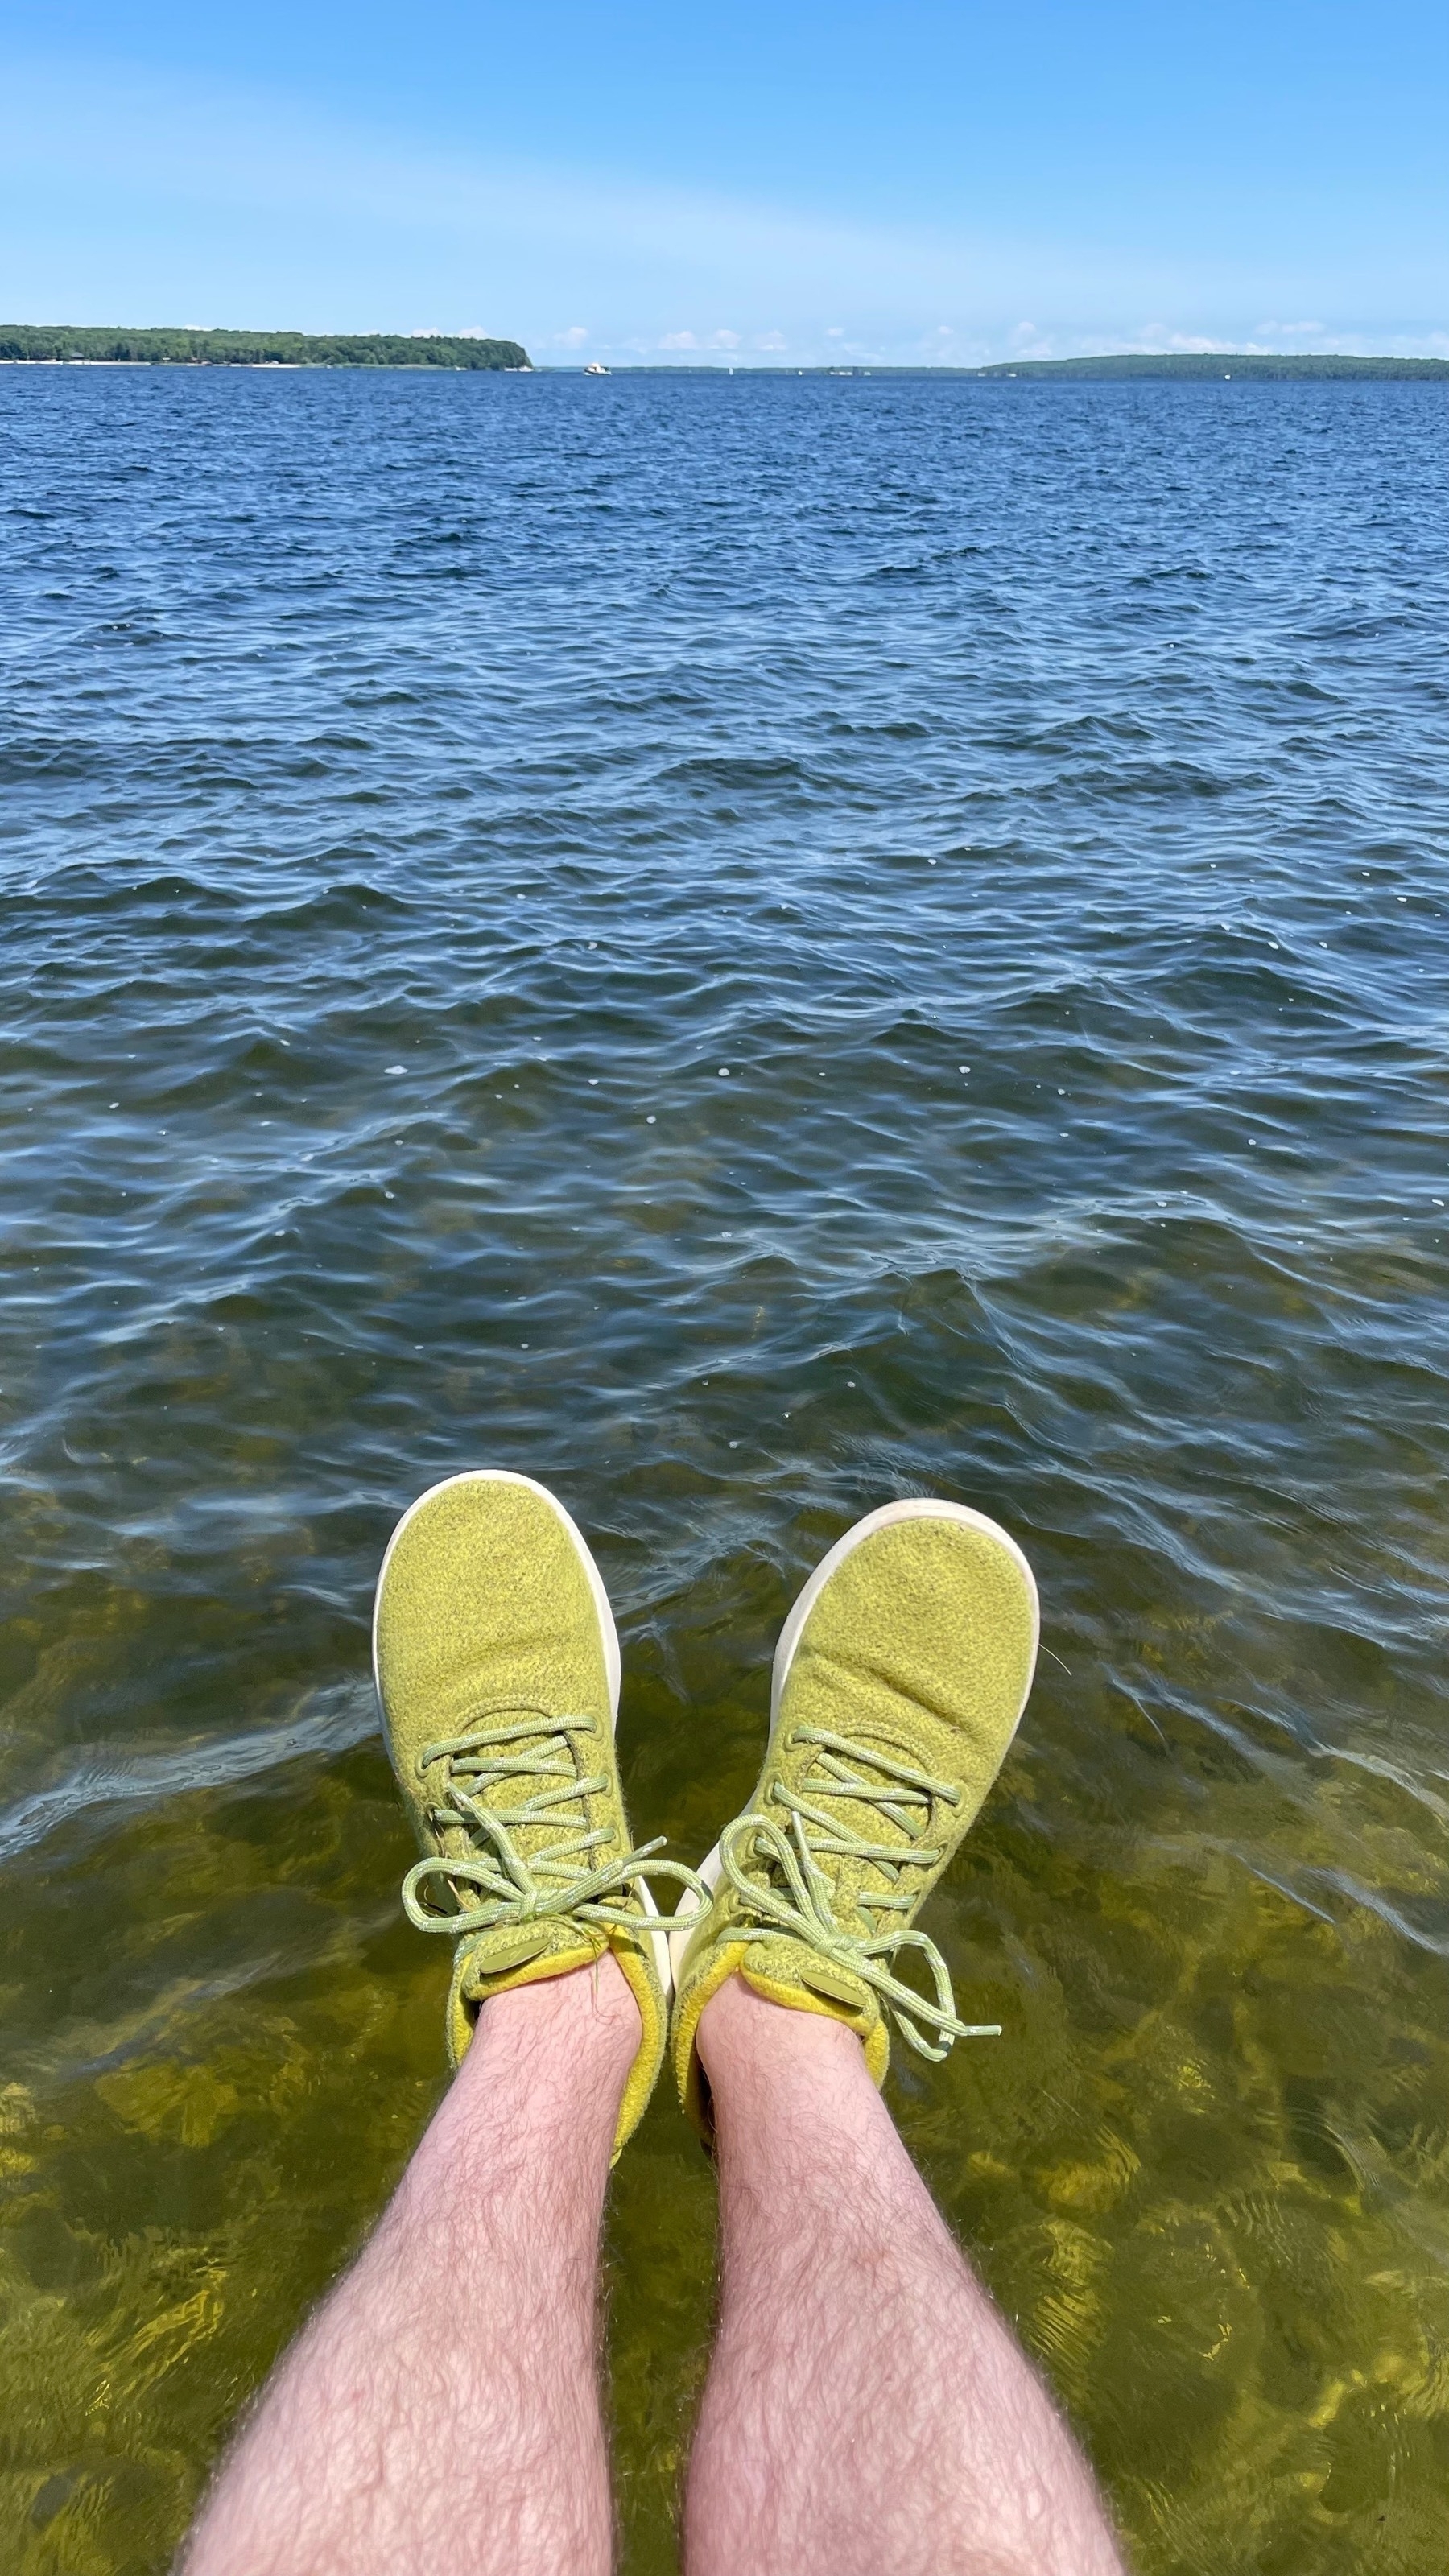 Selfie of my feet in loud green wool shoes over the green and blue water of Georgian Bay. Blue sky and boats in the distance.